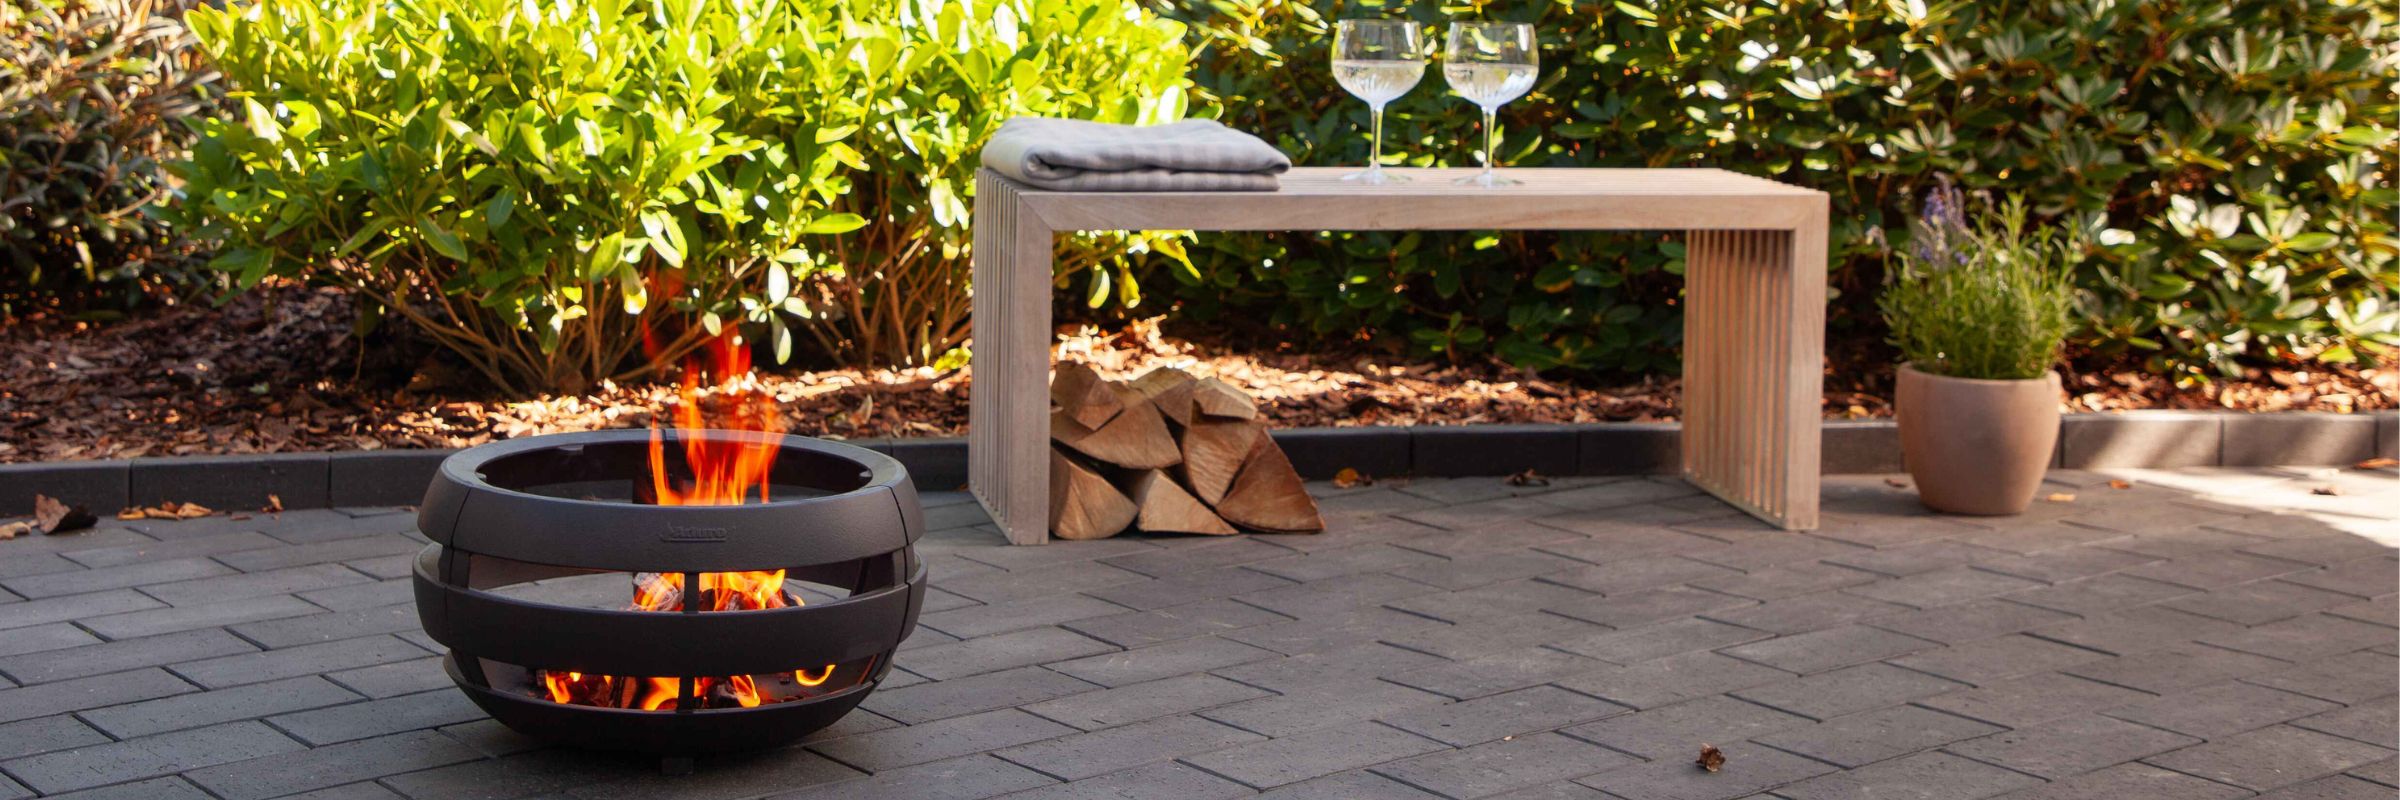 stylish-fire-pit-for-warmth-and-outdoor-cosiness